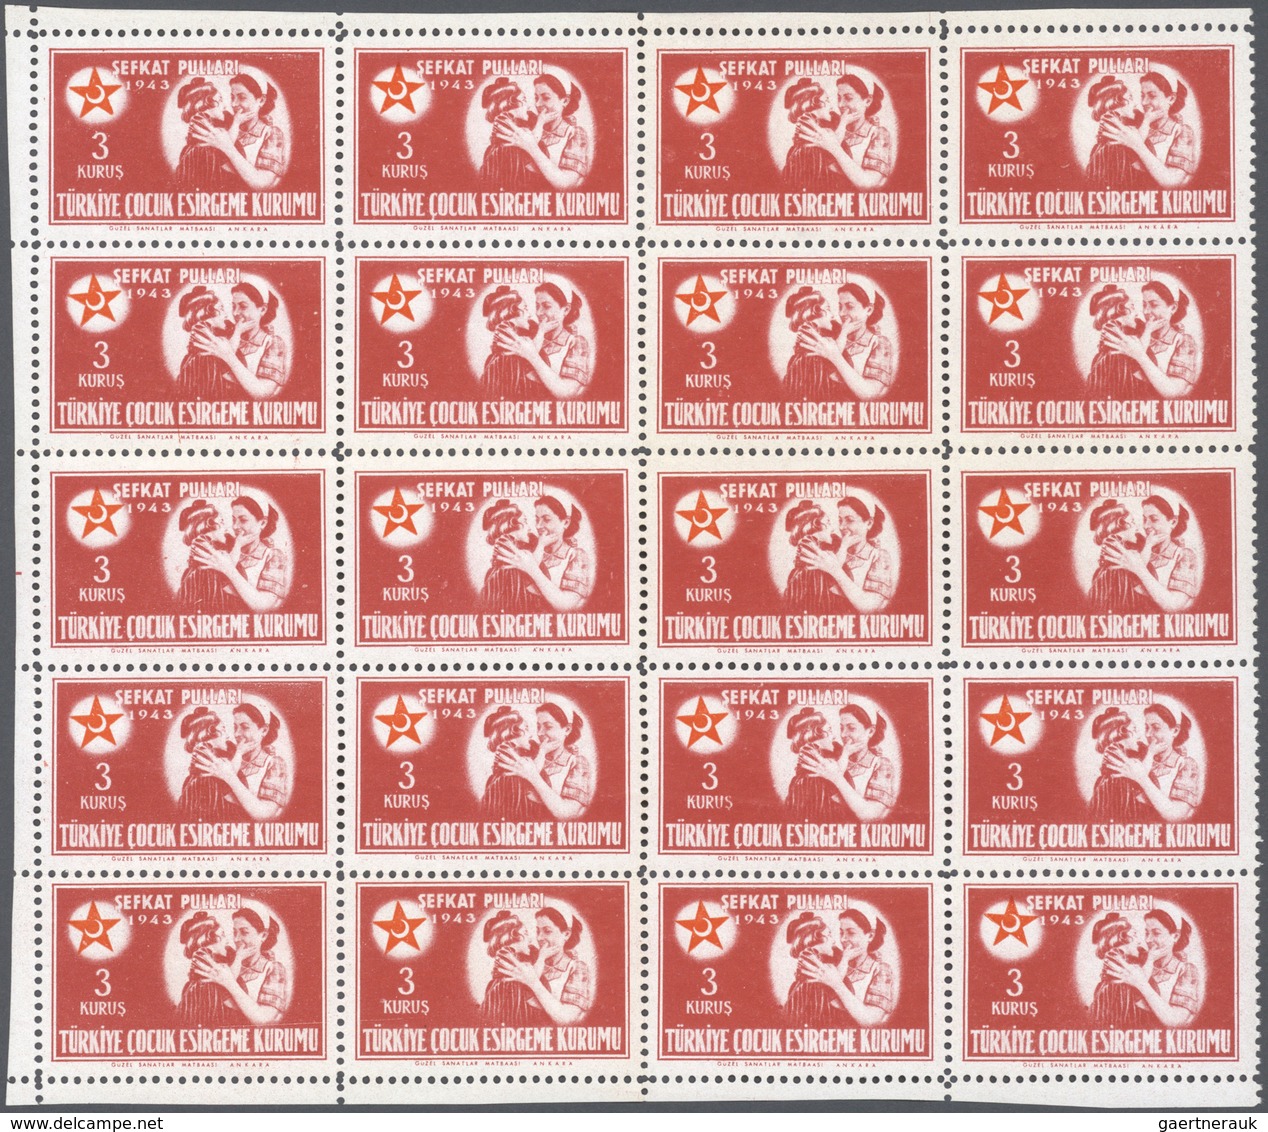 11253 Thematik: Rotes Kreuz / red cross: 1944, set of six values in mint never hinged in complete sheets o